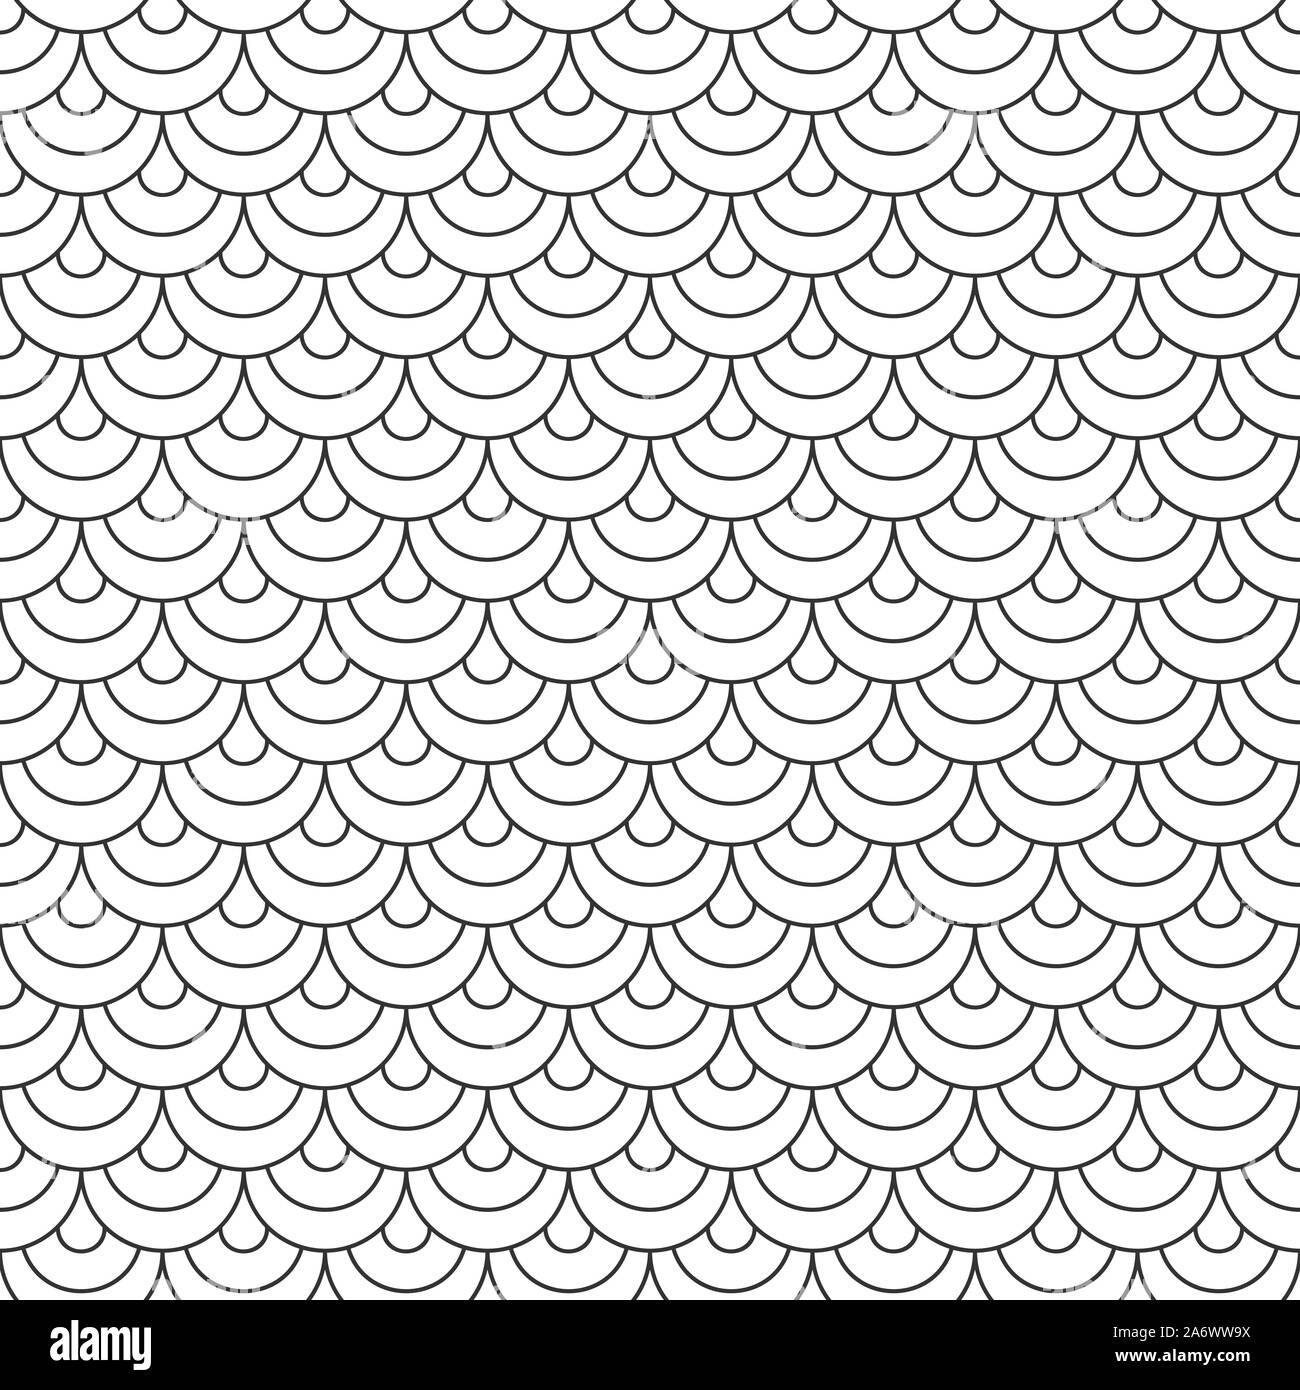 https://c8.alamy.com/comp/2A6WW9X/abstract-seamless-fish-scale-pattern-black-and-white-tile-roof-design-geometric-texture-for-print-linear-style-vector-illustration-2A6WW9X.jpg